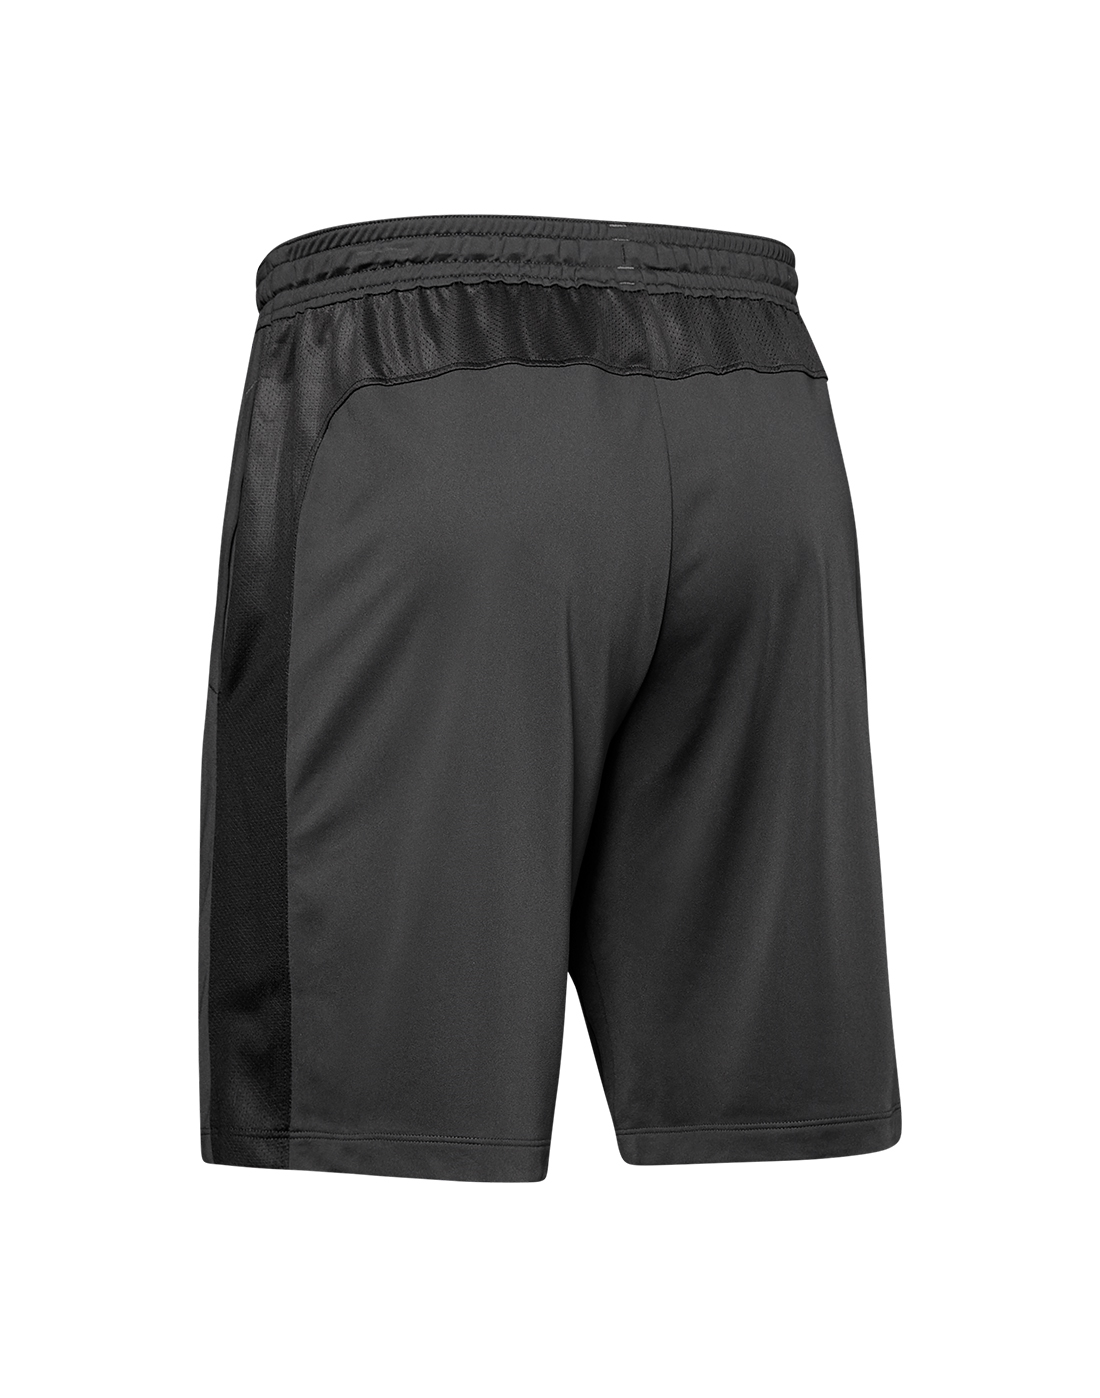 Under Armour Mens MK1 Sublimated Shorts - Grey | Life Style Sports IE